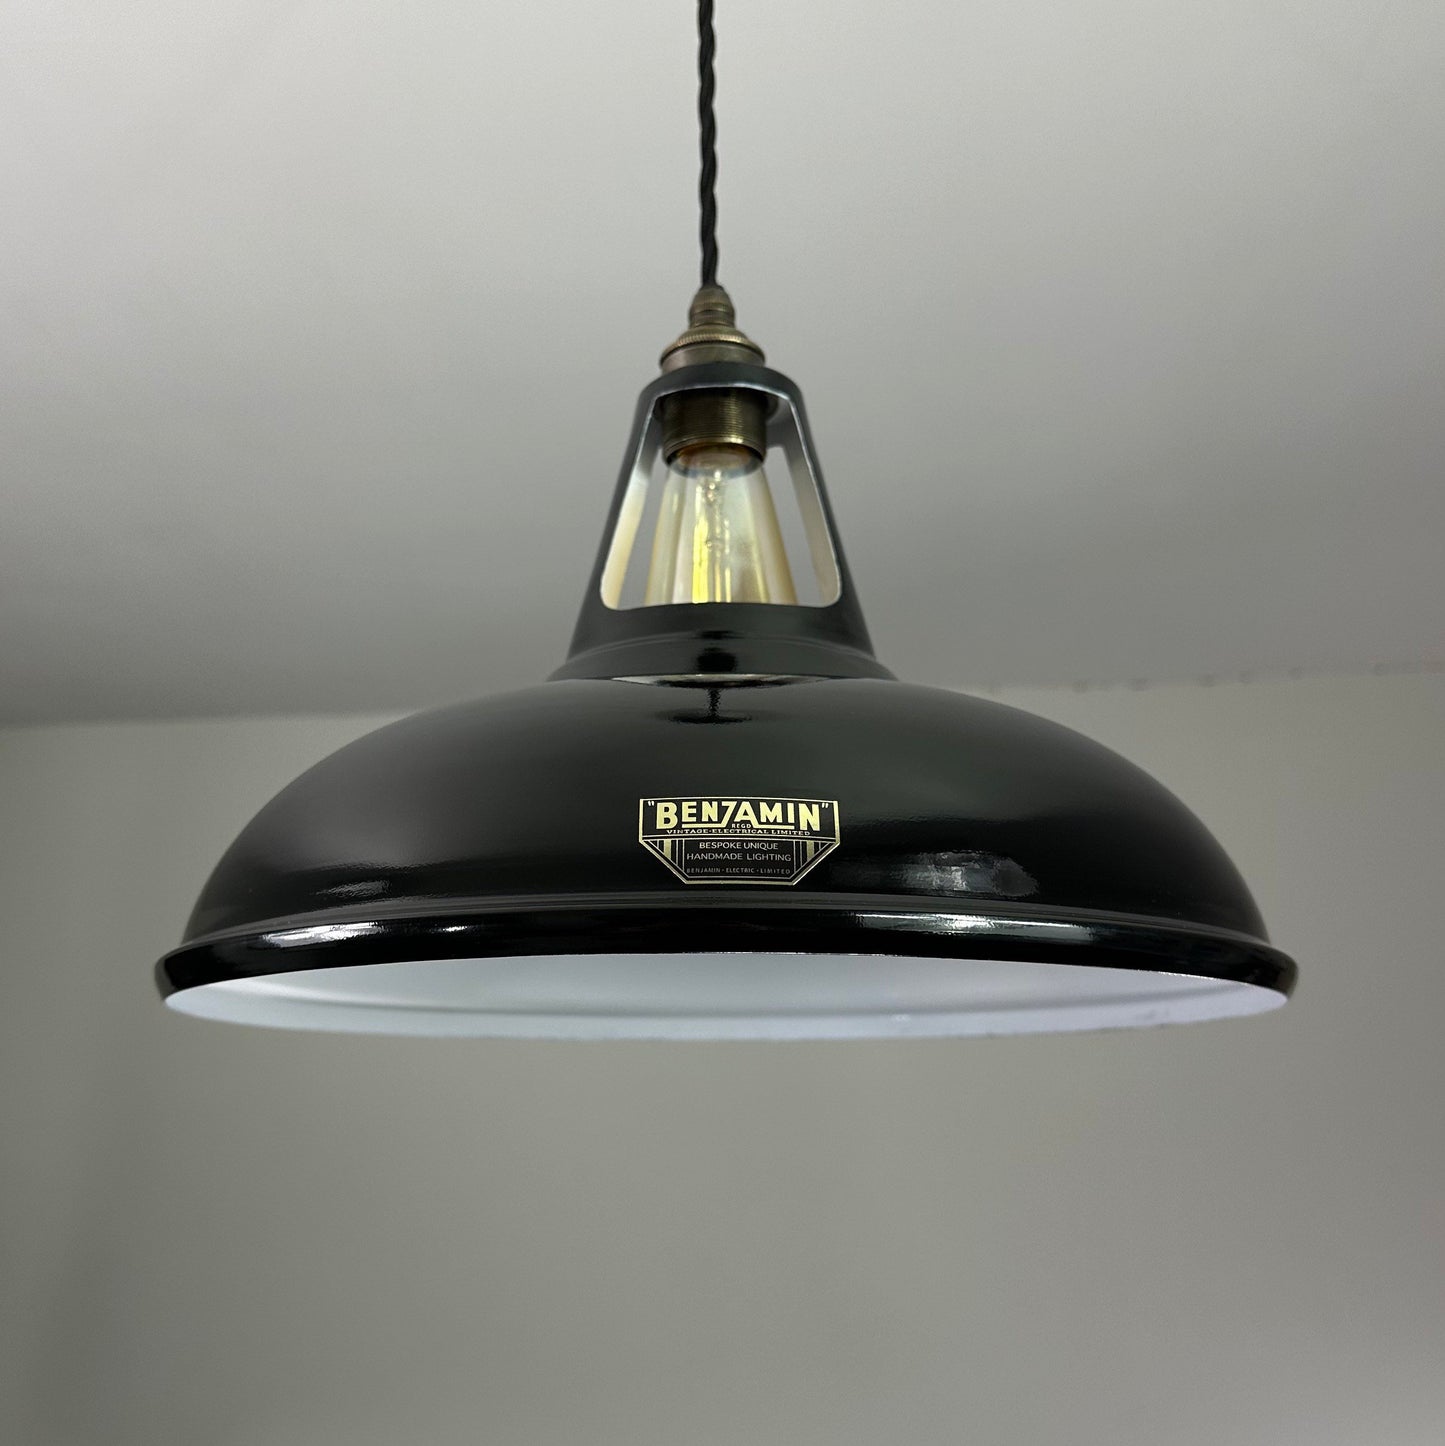 Cawston XL ~ Midnight Black Solid Shade Slotted Design Pendant Set Light | Ceiling Dining Room | Kitchen Table | Vintage Bulb 14 Inch